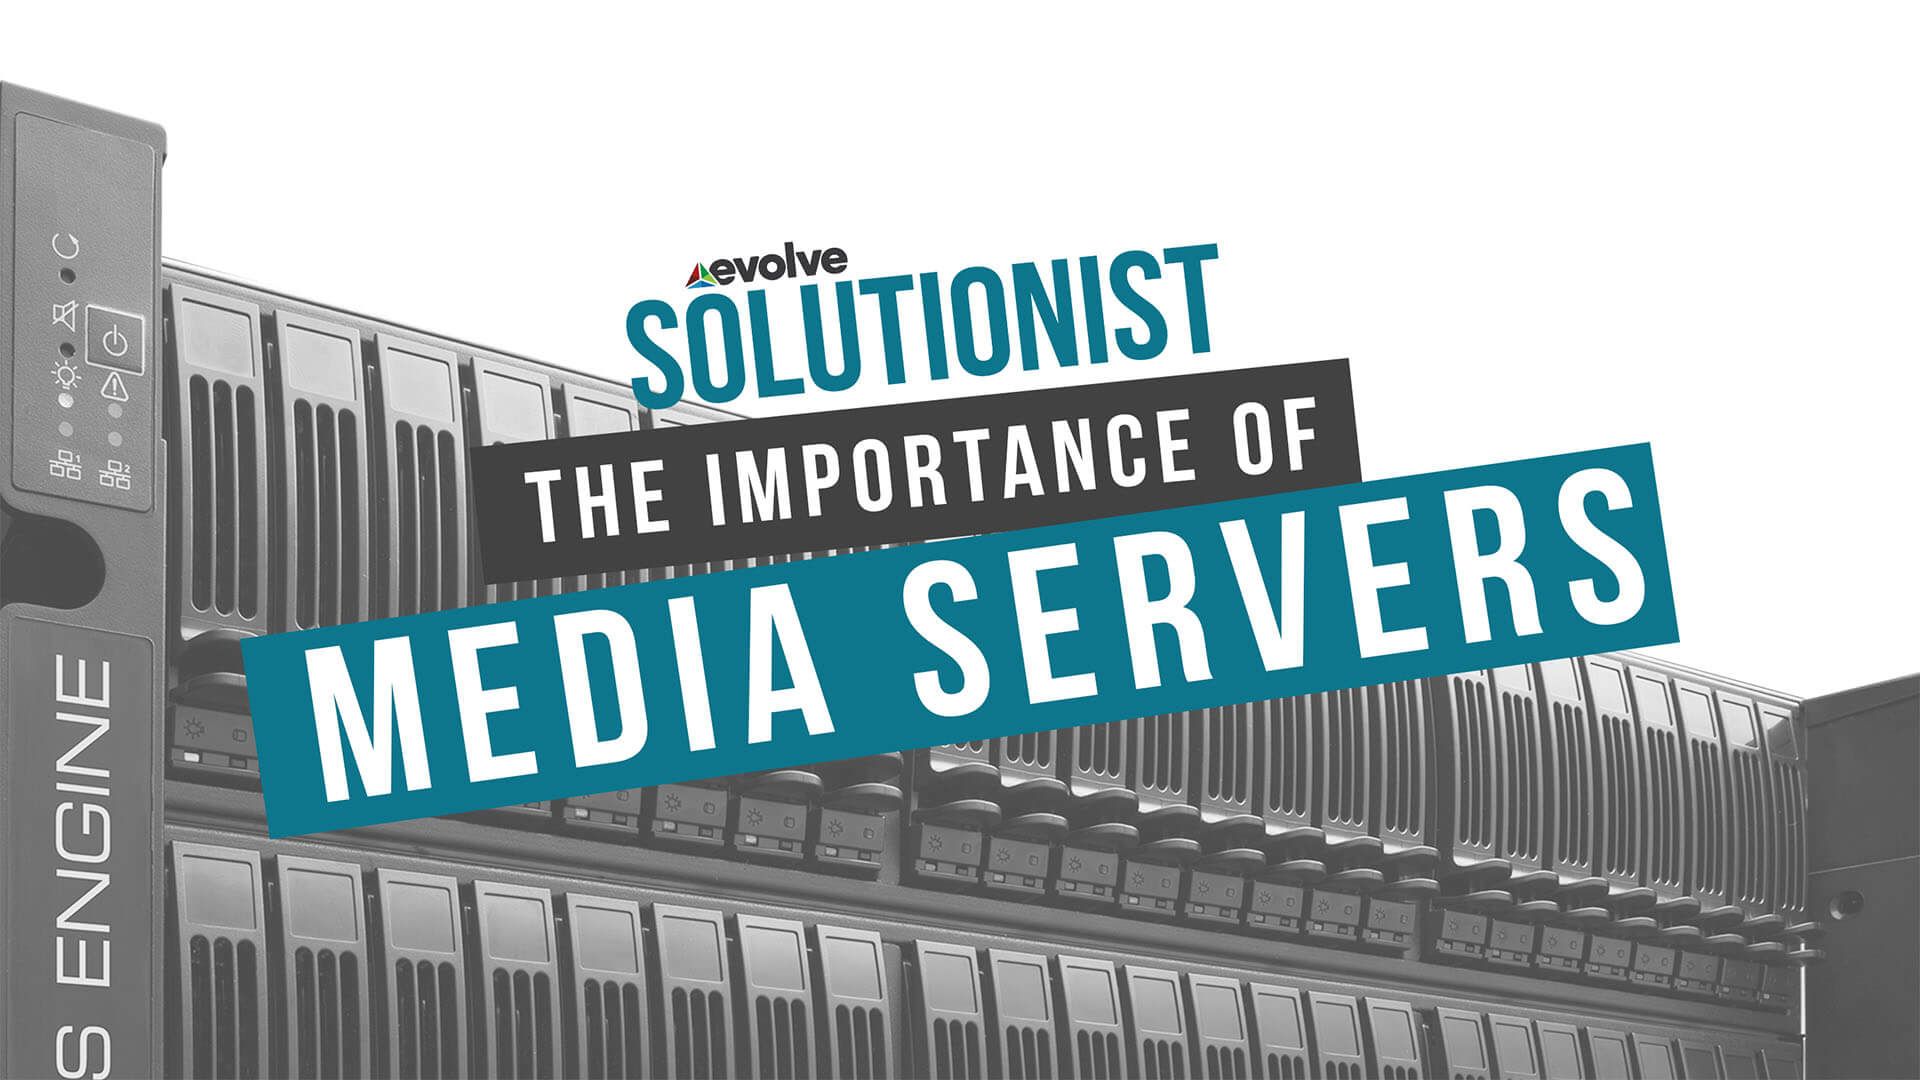 The importance of media servers.